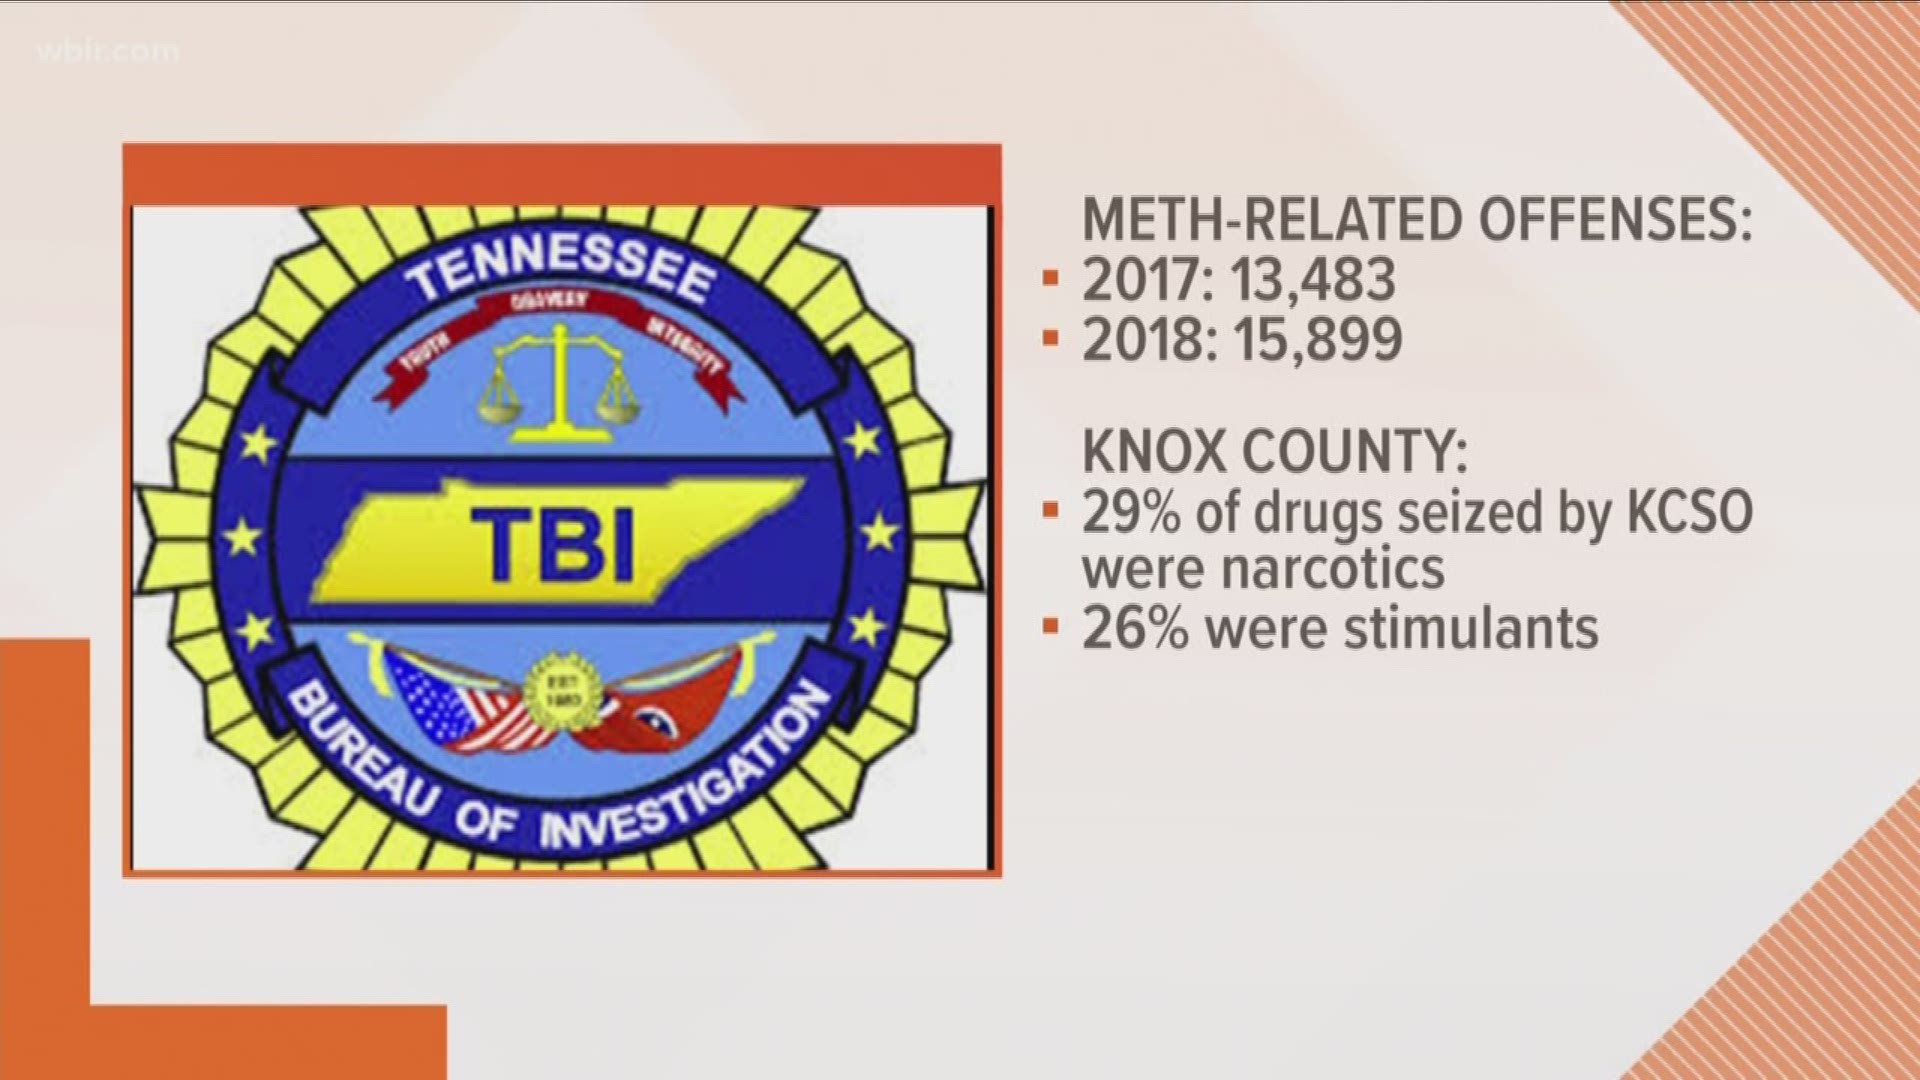 The TBI says methamphetamine-related crimes are rising in Tennessee. A new report says the number of meth offenses spiked from more than 13,000 to almost 16,000 in 2018.